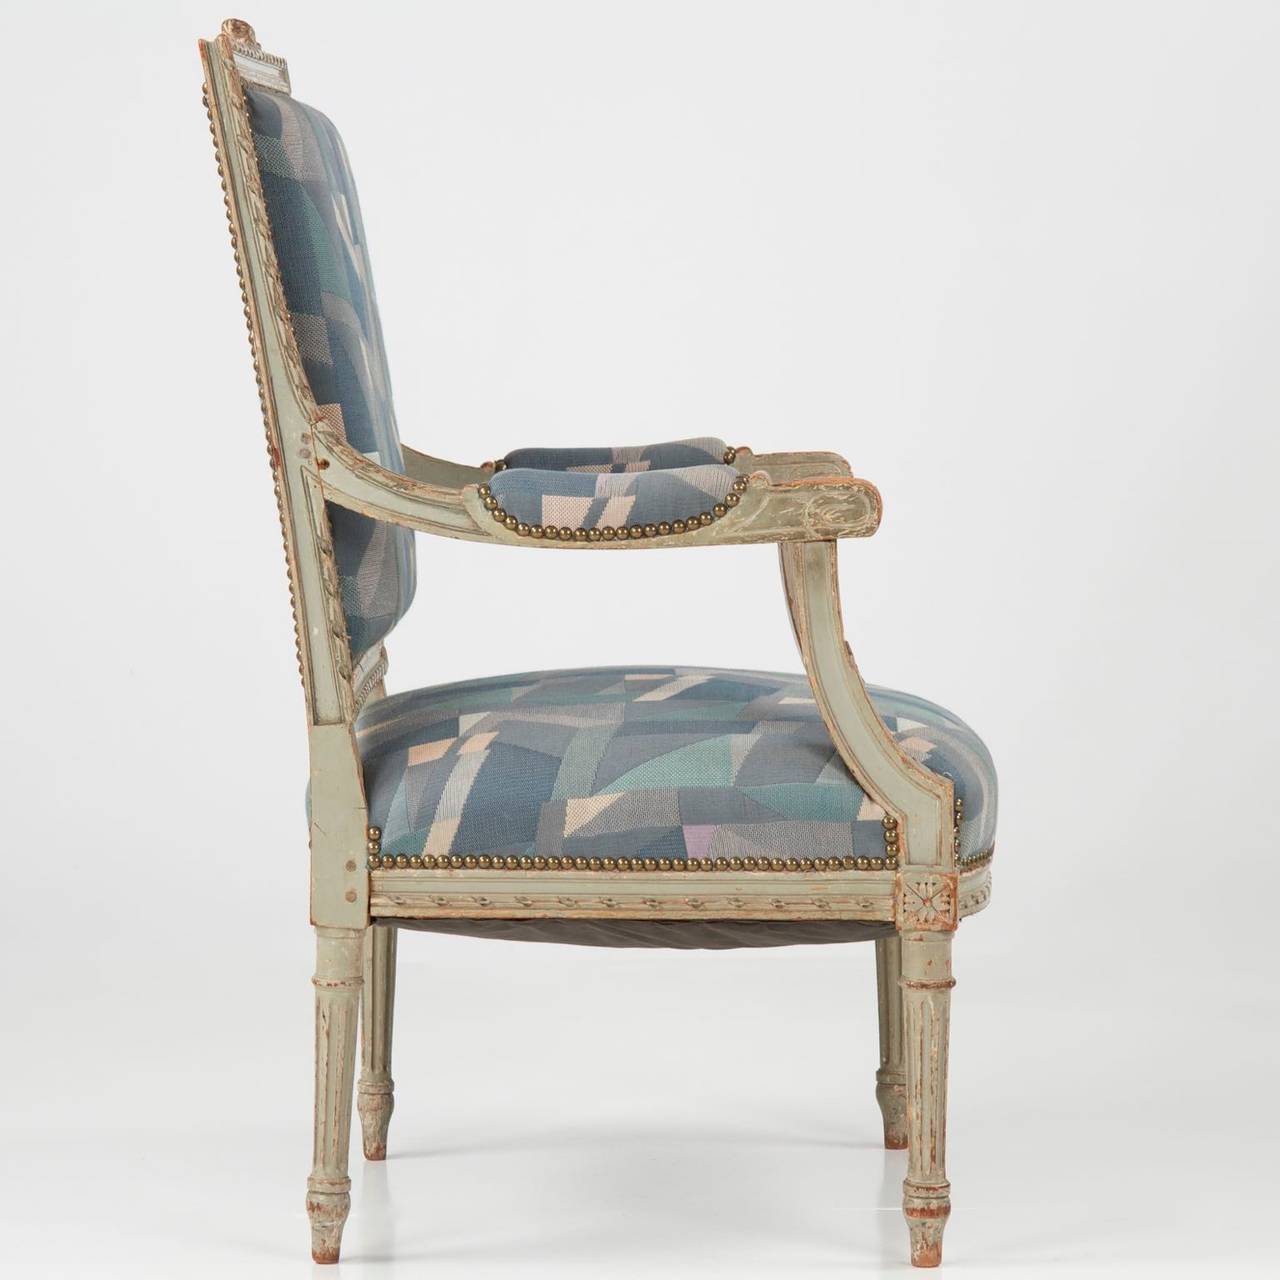 FRENCH LOUIS XVI STYLE GRAY PAINTED ANTIQUE FAUTEUIL ARM CHAIR
19th Century with wonderful early surface
Item #  503FXY22

This is a delightful early to mid 19th Century antique arm chair in the Louis XVI taste, carved in a provincial manner